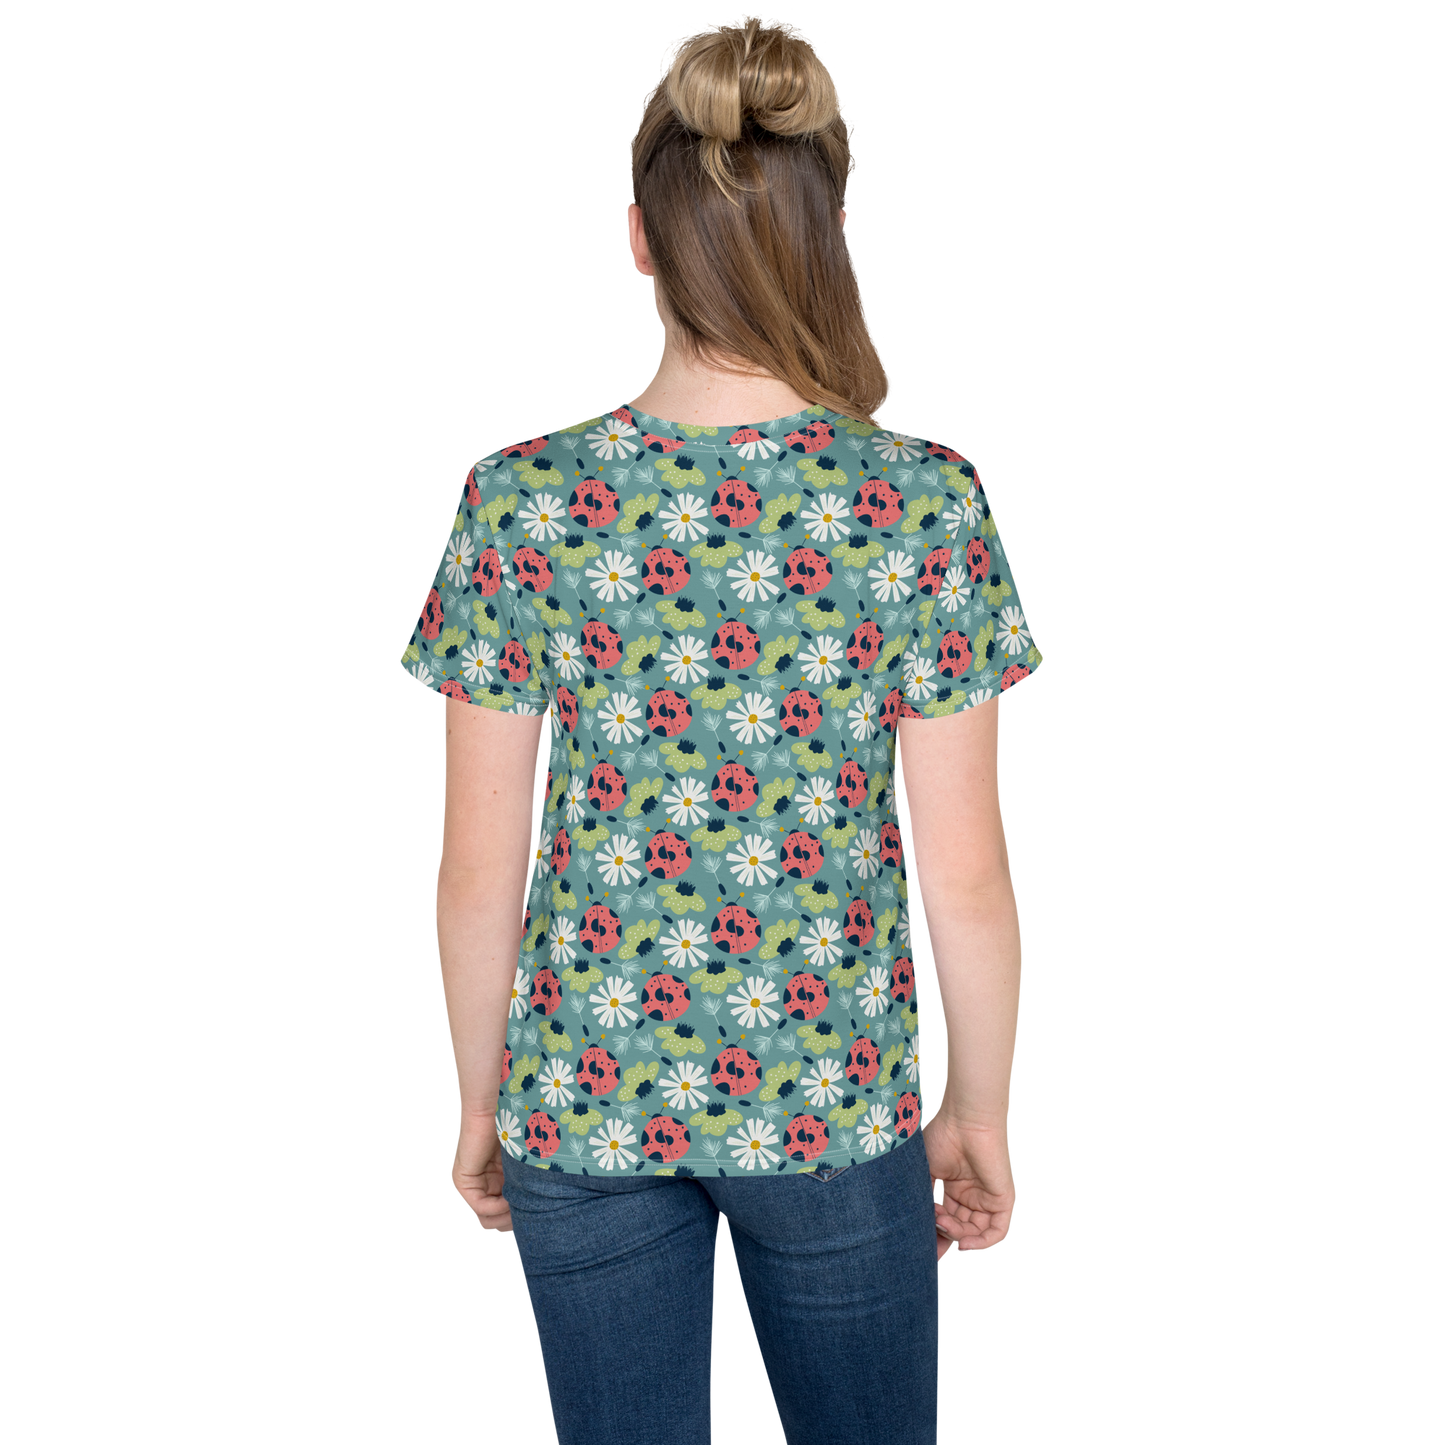 Scandinavian Spring Floral | Seamless Patterns | All-Over Print Youth Crew Neck T-shirt - #2